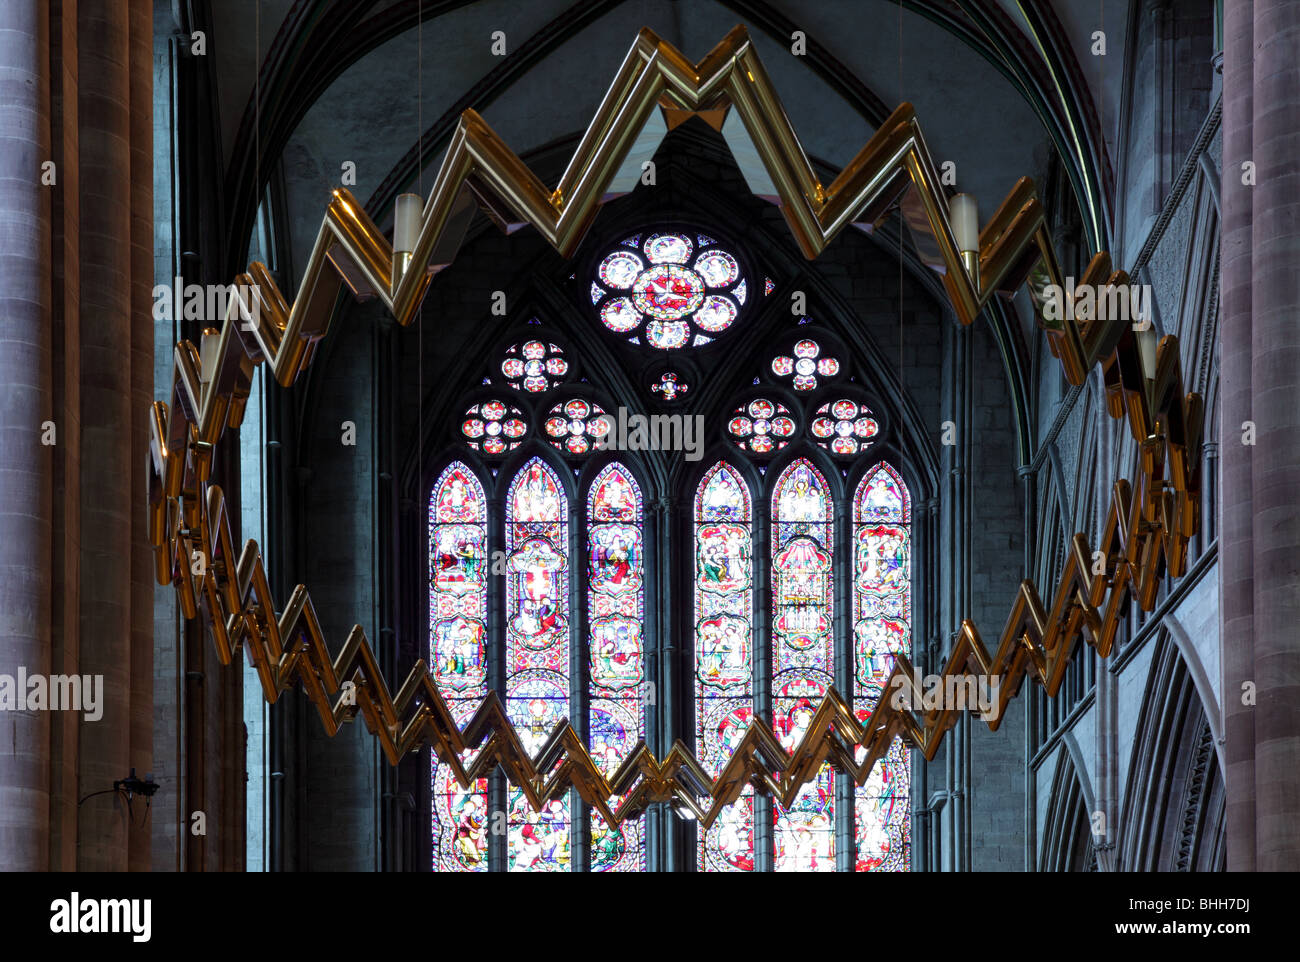 The Hereford Corona in Hereford Cathedral with the north transept window by Hardman in the background. Stock Photo